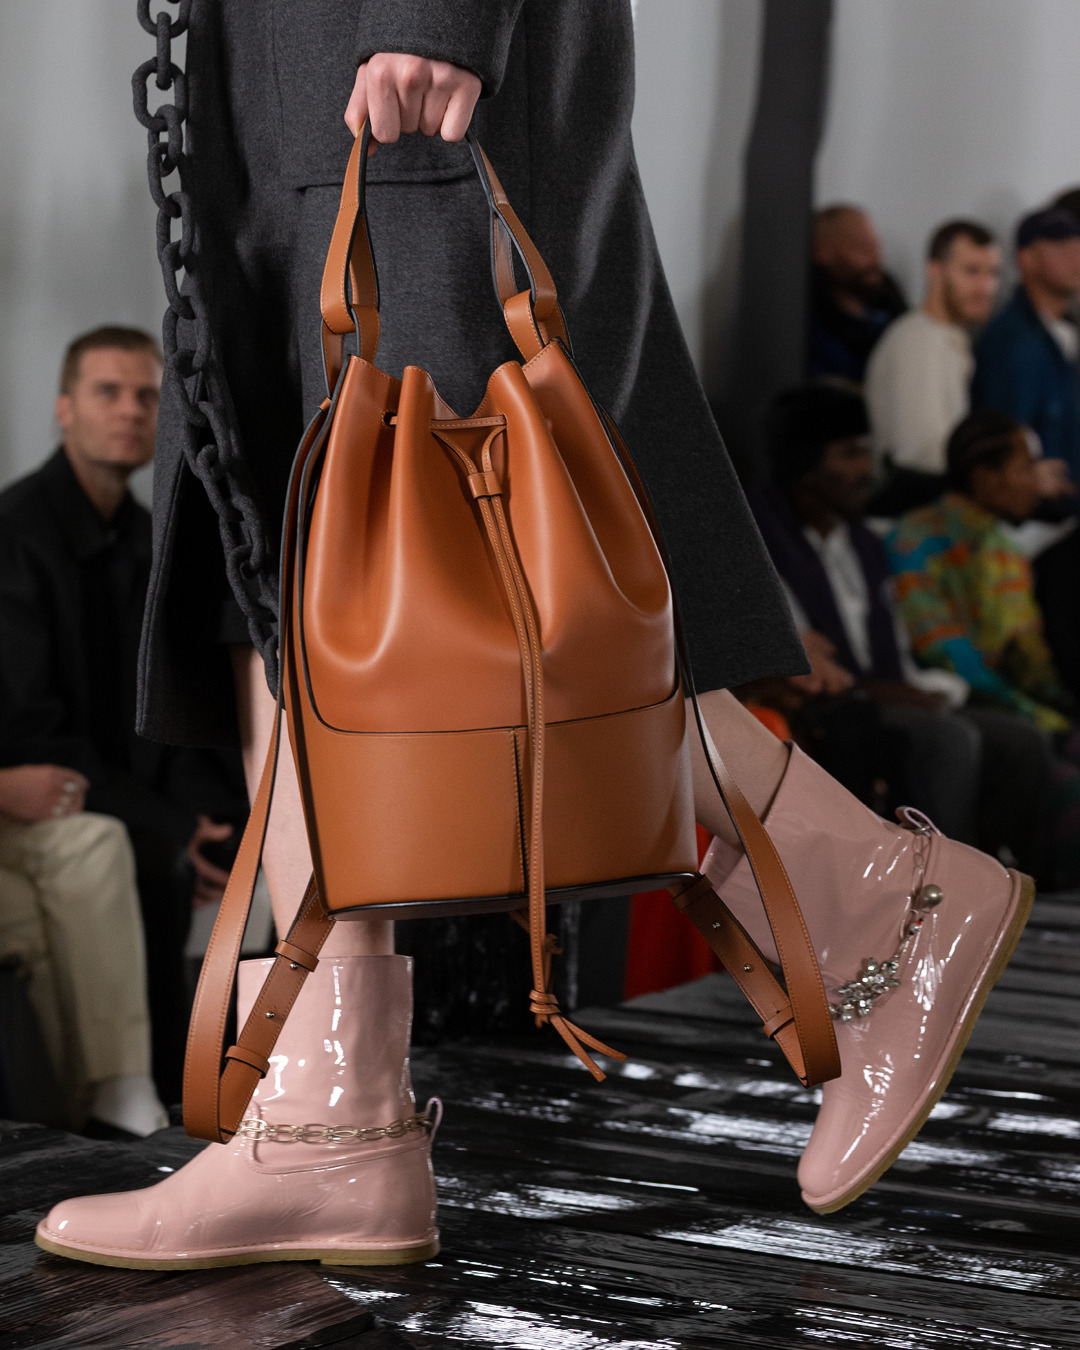 LOEWE - The new Balloon backpack crafted in tan leather debuted at the LOEWE FW20 Men's show.

Now available on loewe.com

#LOEWE #LOEWEFW20 #BalloonBag